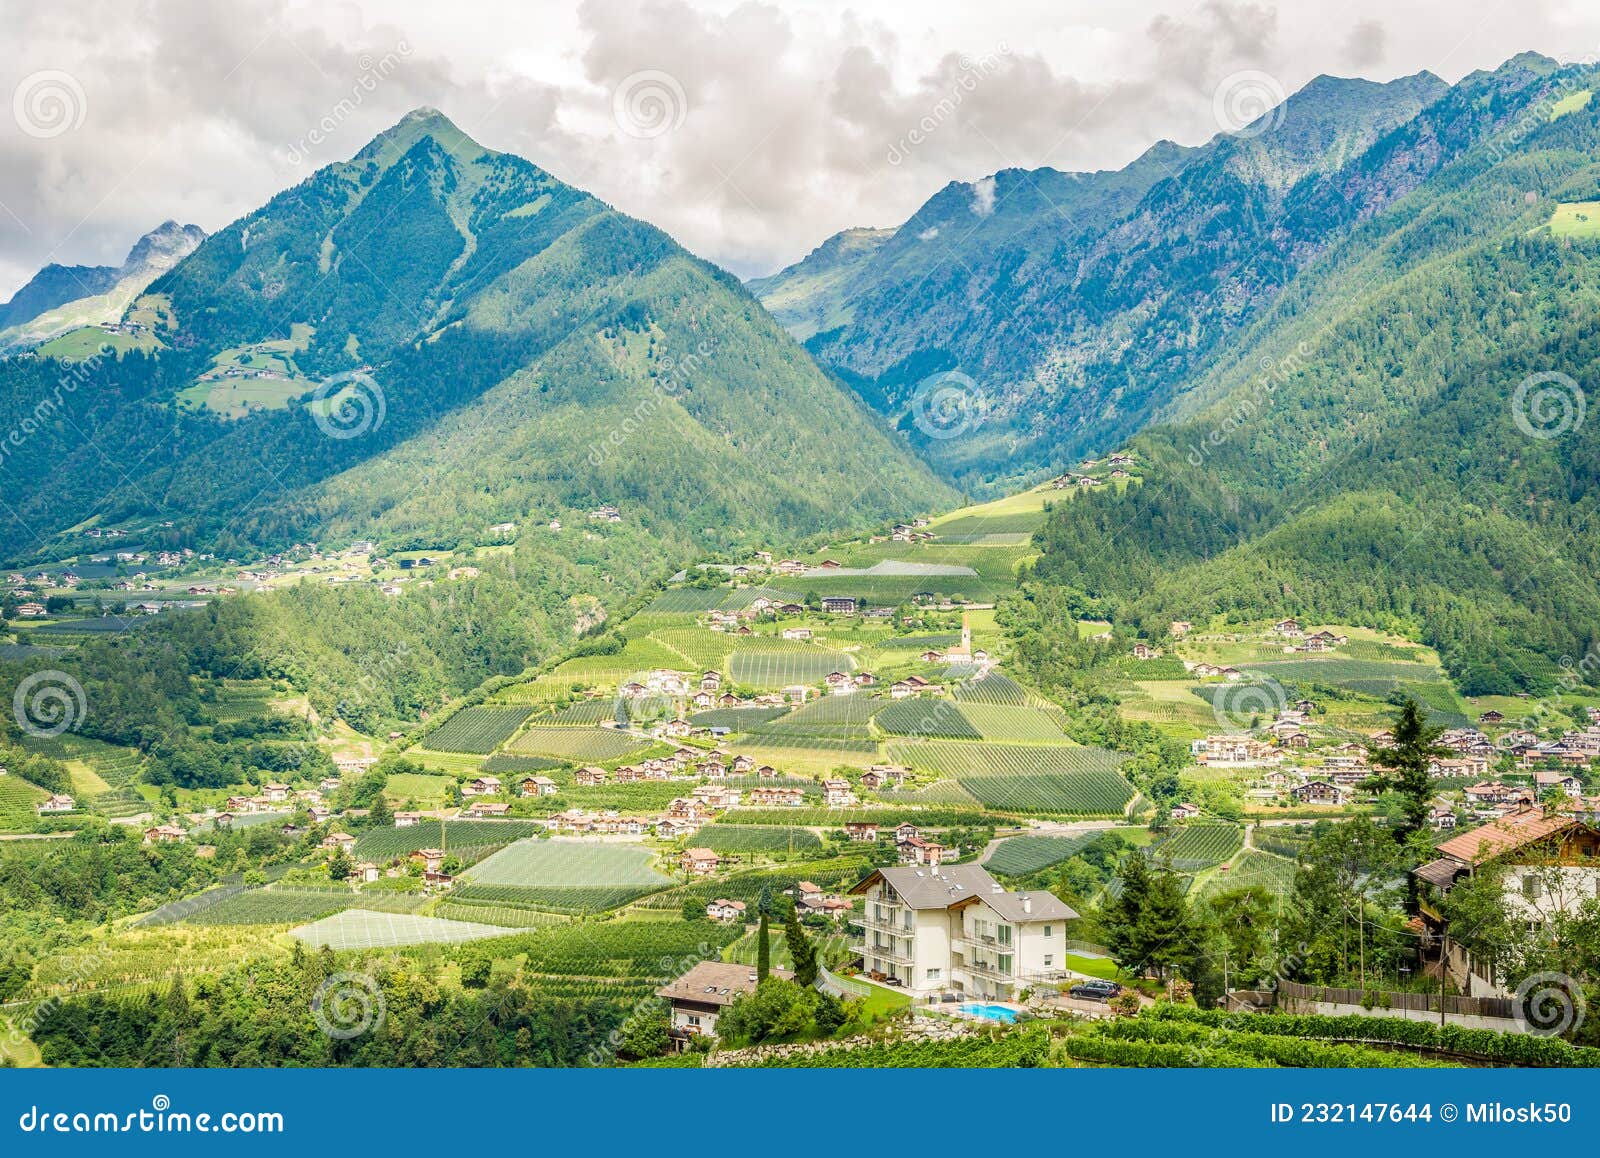 view at the scenery of nature from scena town - italy